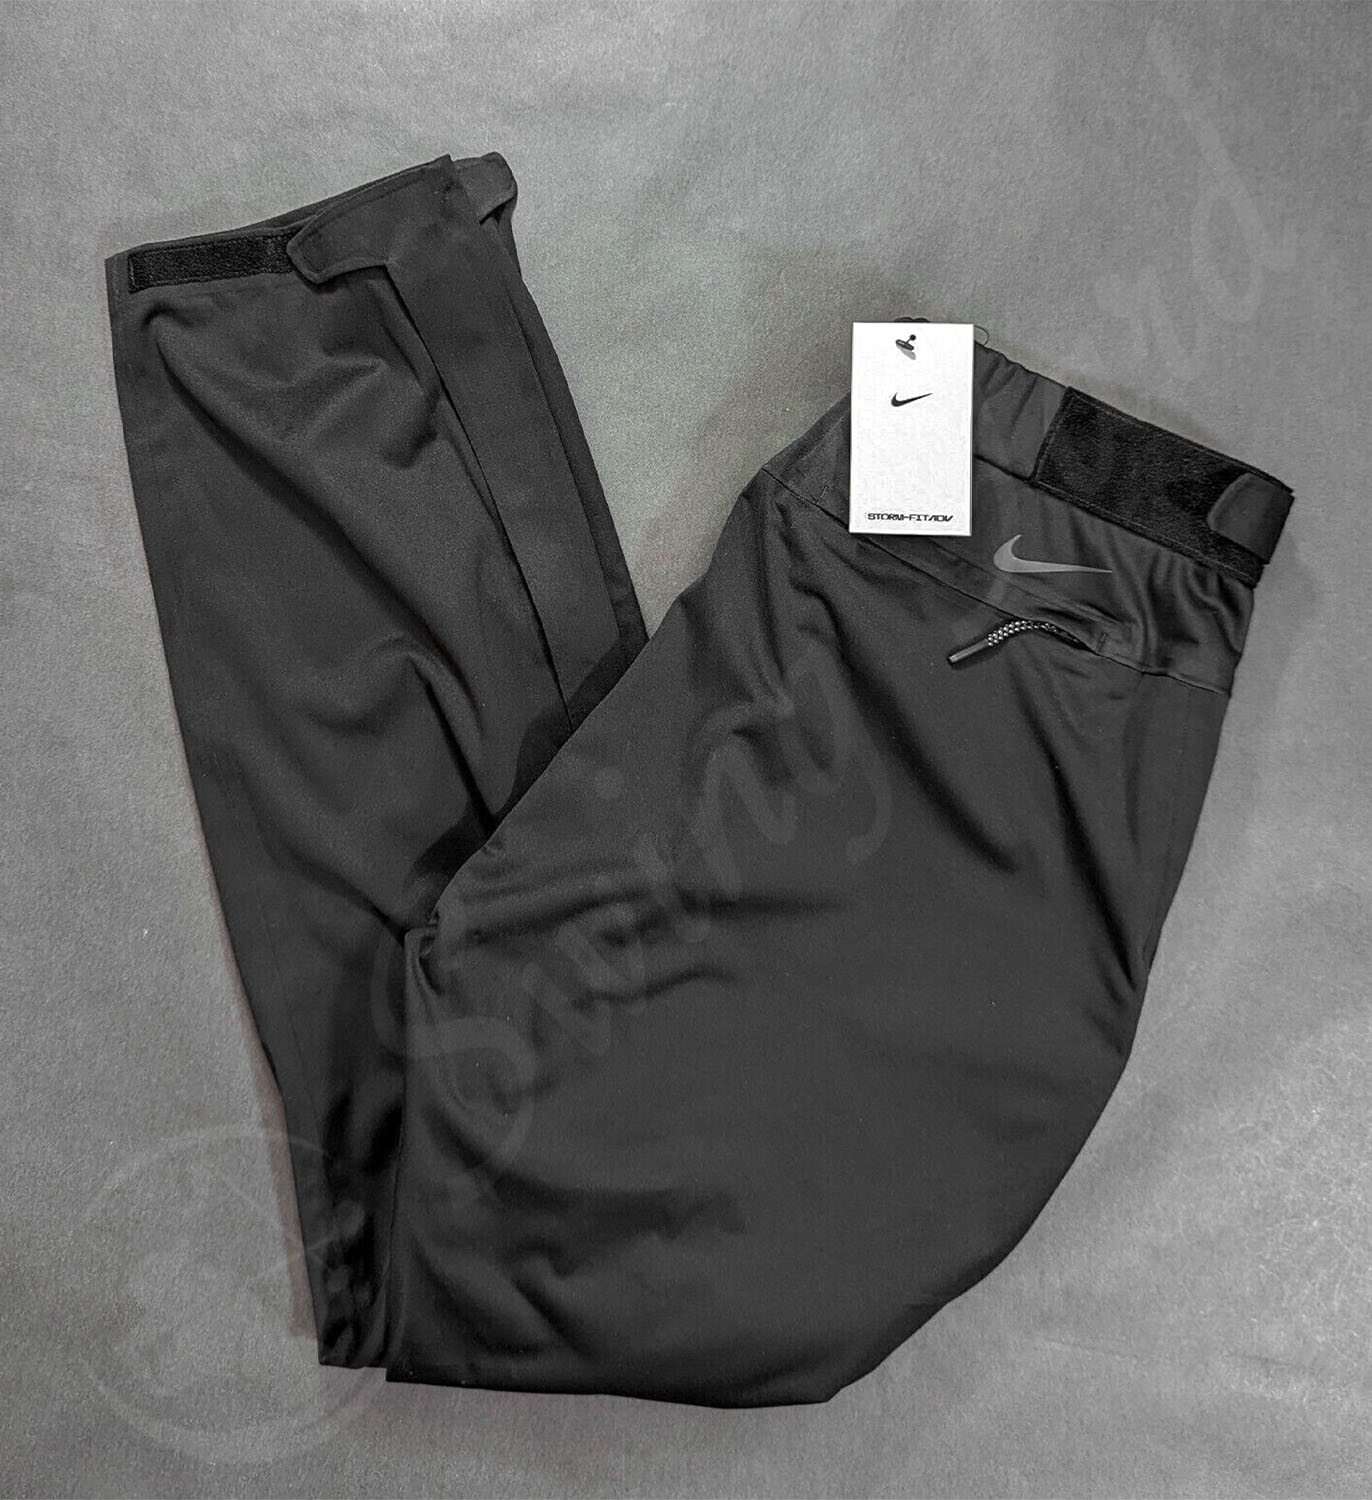 My new Nike storm fit advanced winter golf pants for cold weather